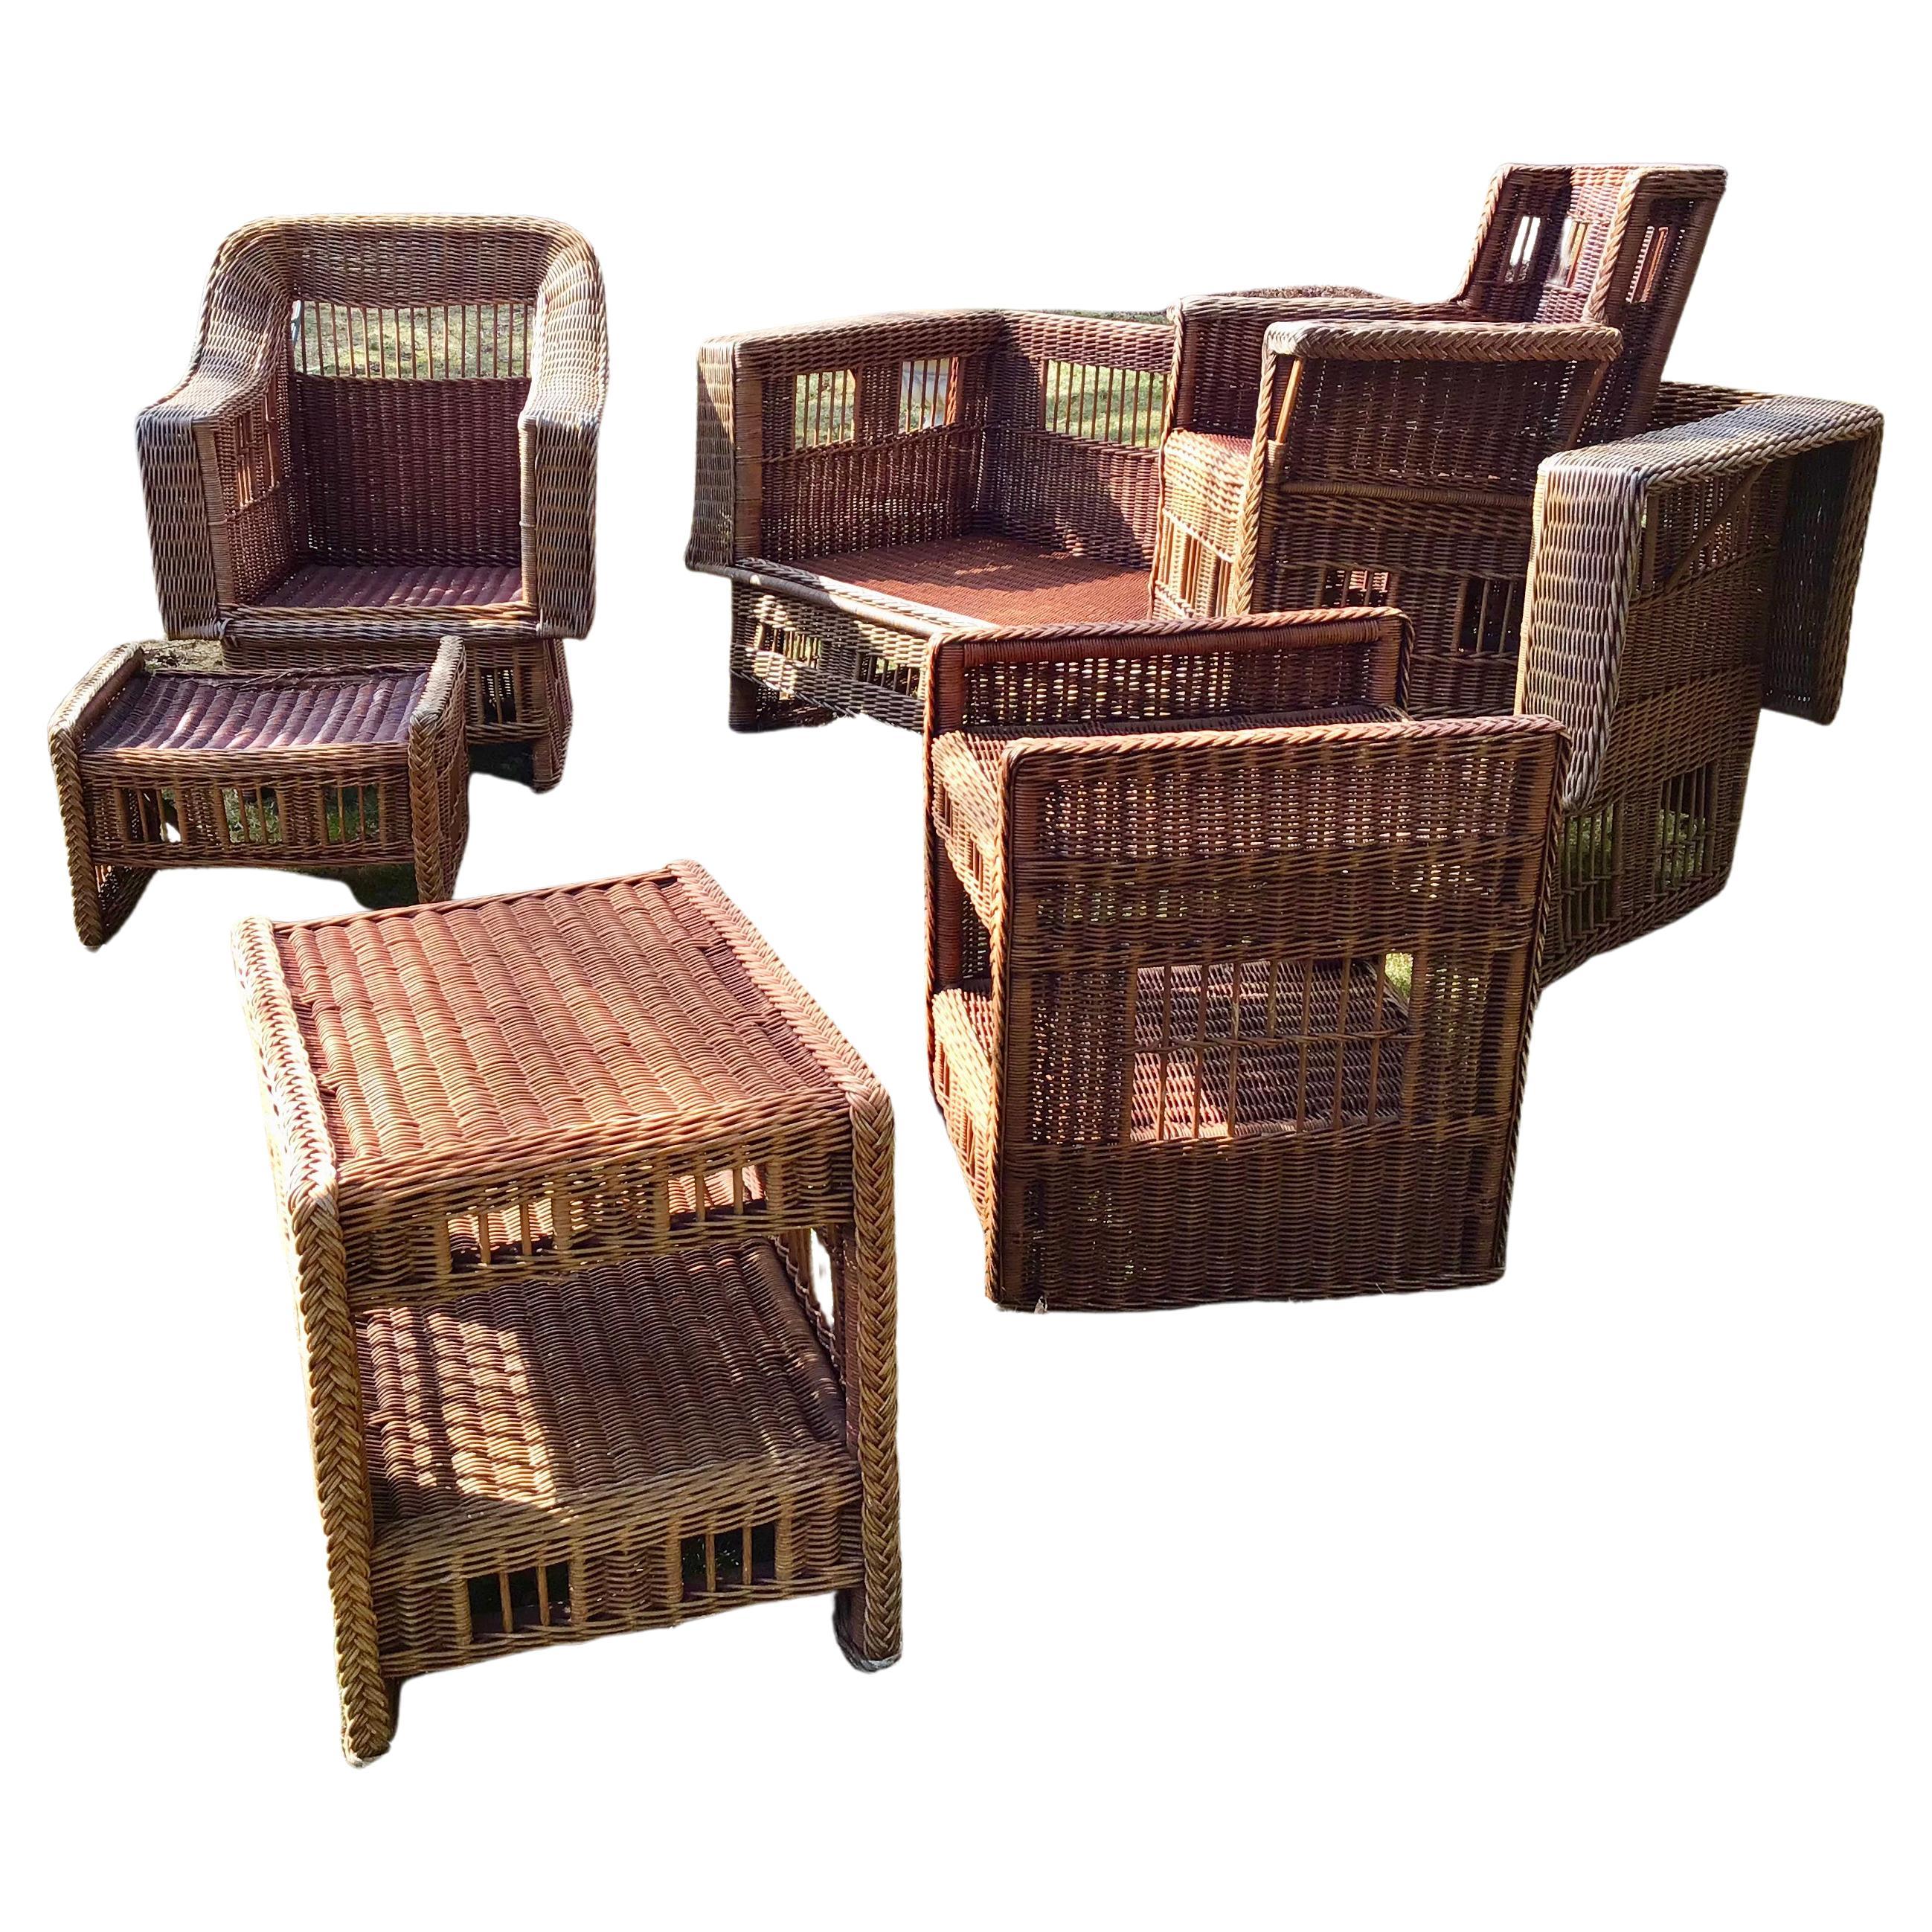 Stickley Willow Pattern Arts and Crafts Wicker Furniture Set 6 pieces